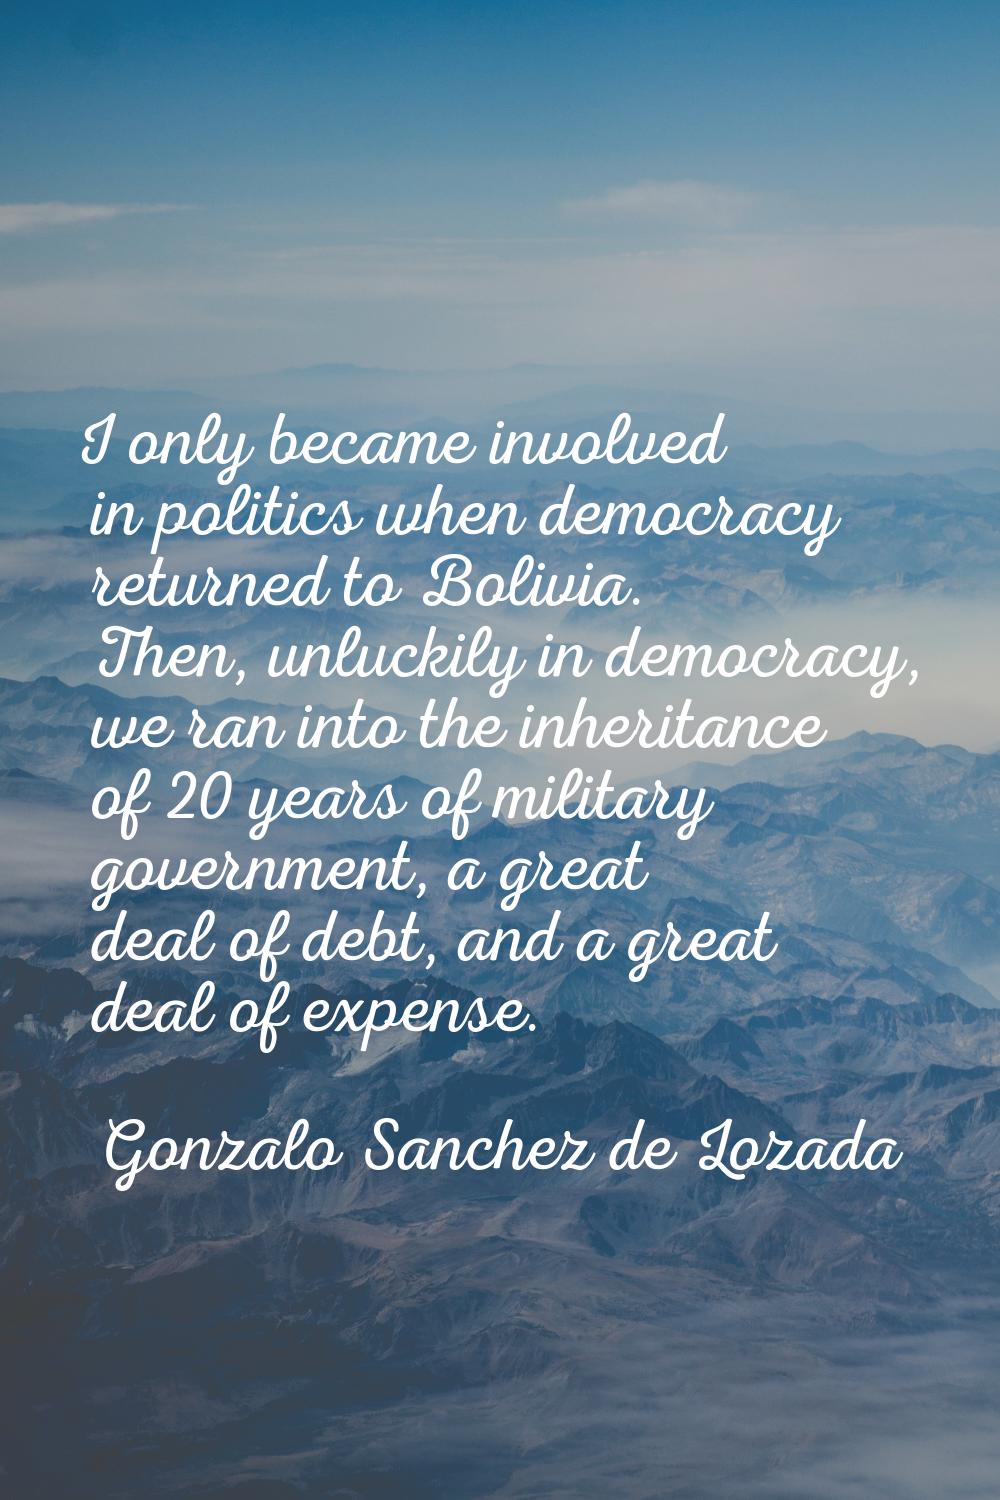 I only became involved in politics when democracy returned to Bolivia. Then, unluckily in democracy